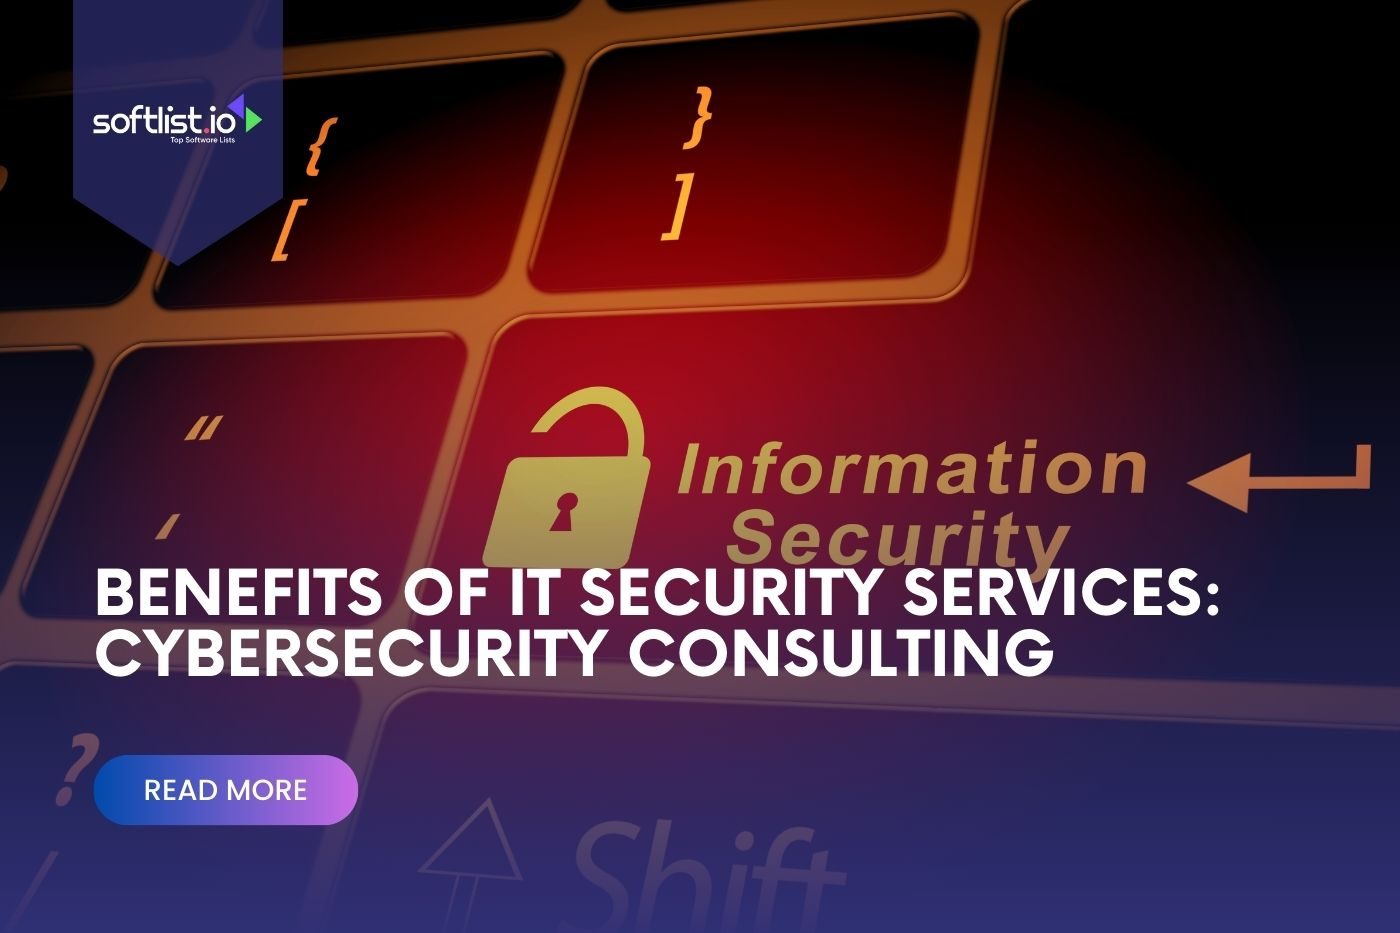 Benefits of IT Security Services